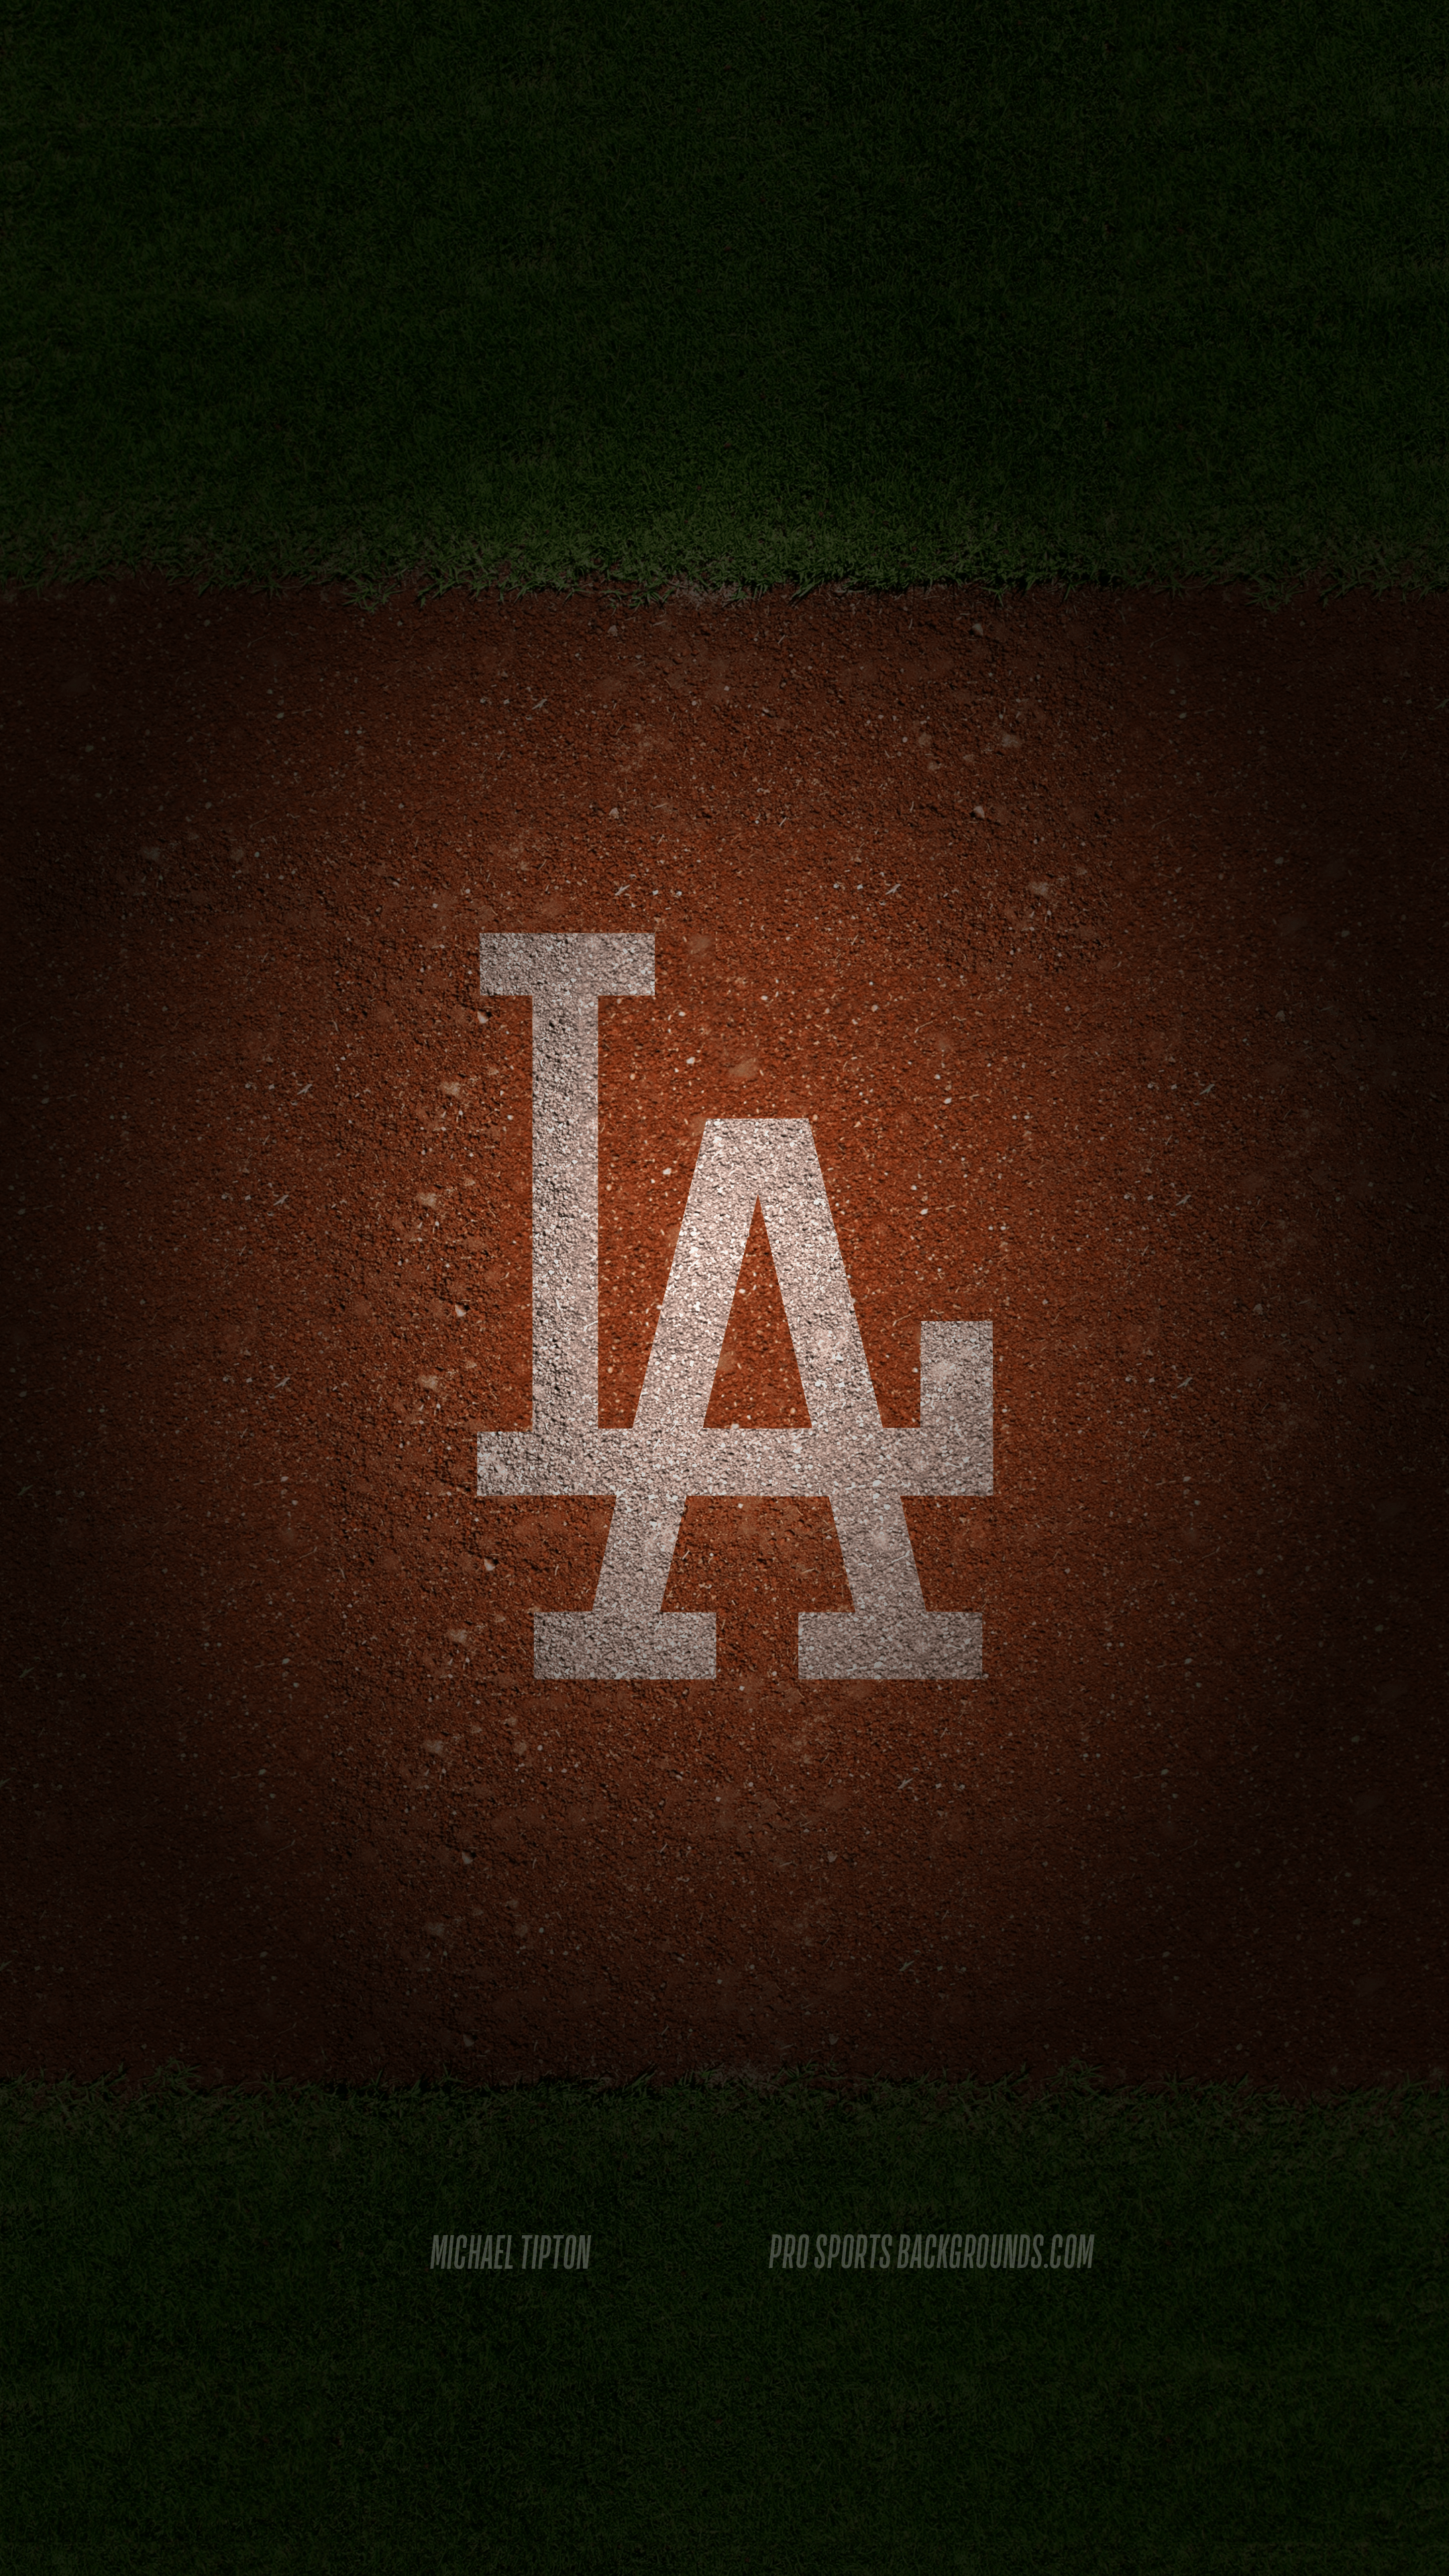 Los Angeles Dodgers Wallpaper Pro Sports Background